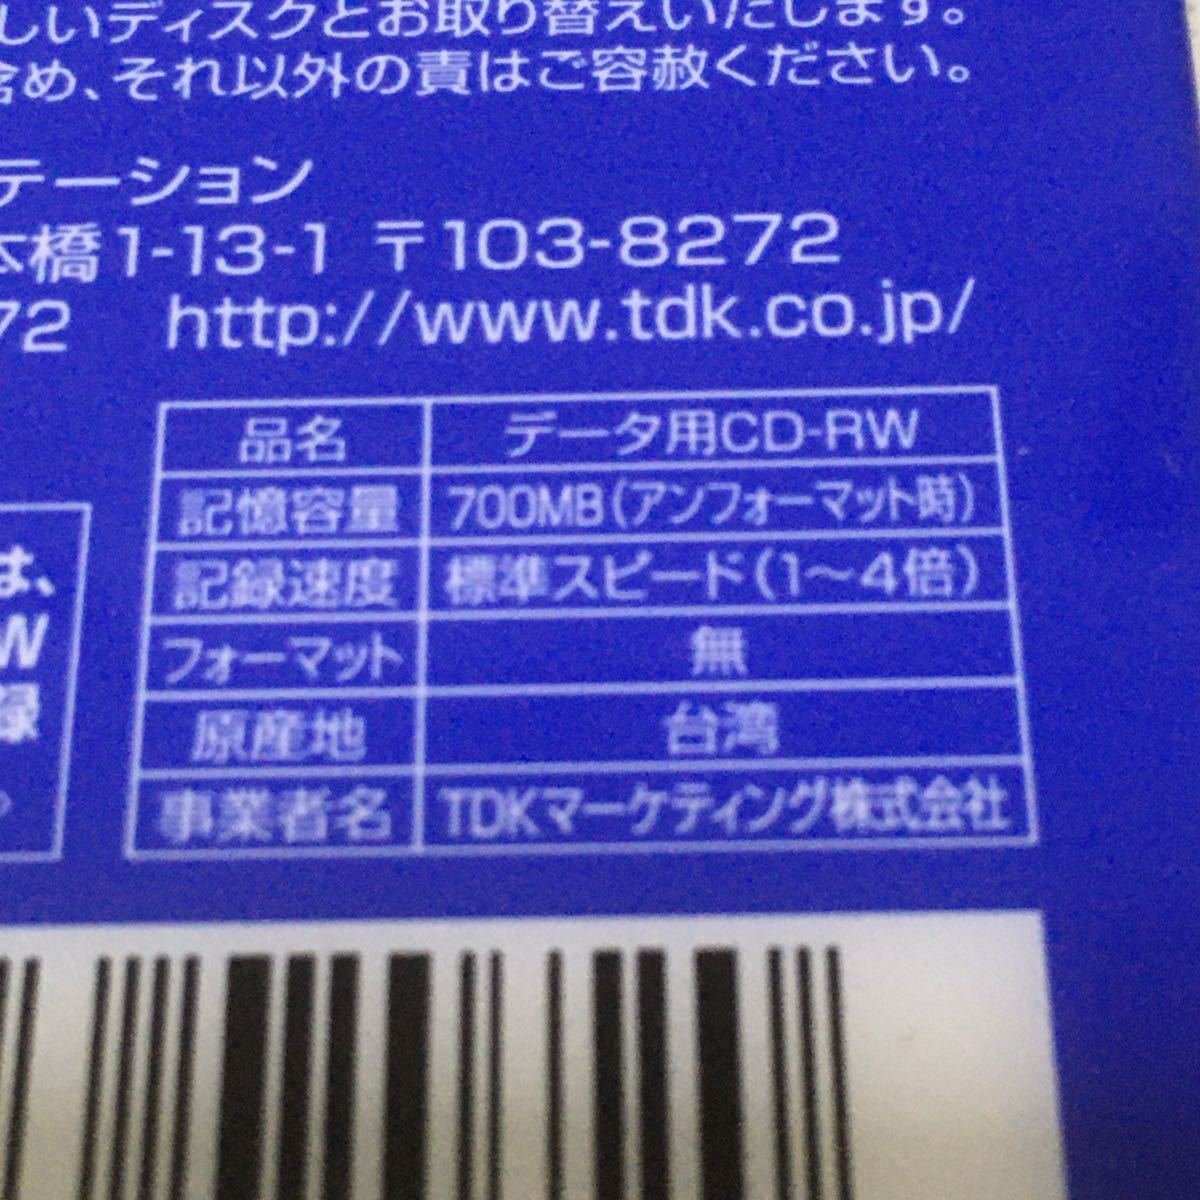  new goods unopened TDK CD-RW data for 700MB 4 speed 10mm thickness in the case [CD-RW80S] 2 pieces set 